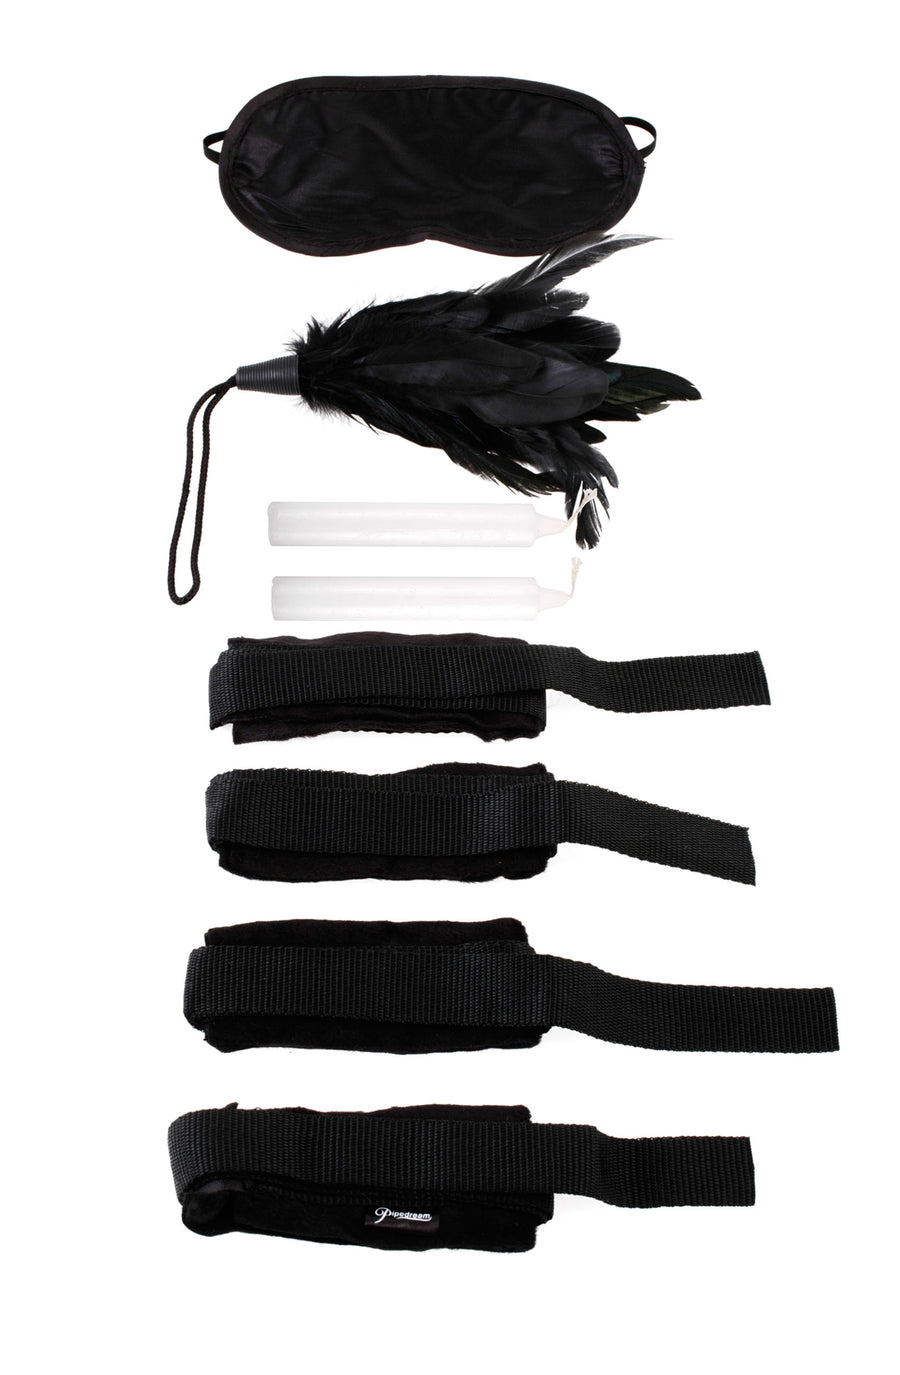 Pipedream Fetish Fantasy Series Beginner's Bondage Kit includes 4 Velvet Cuffs with Tethers + 1 Feather Tickler + 2 Candles